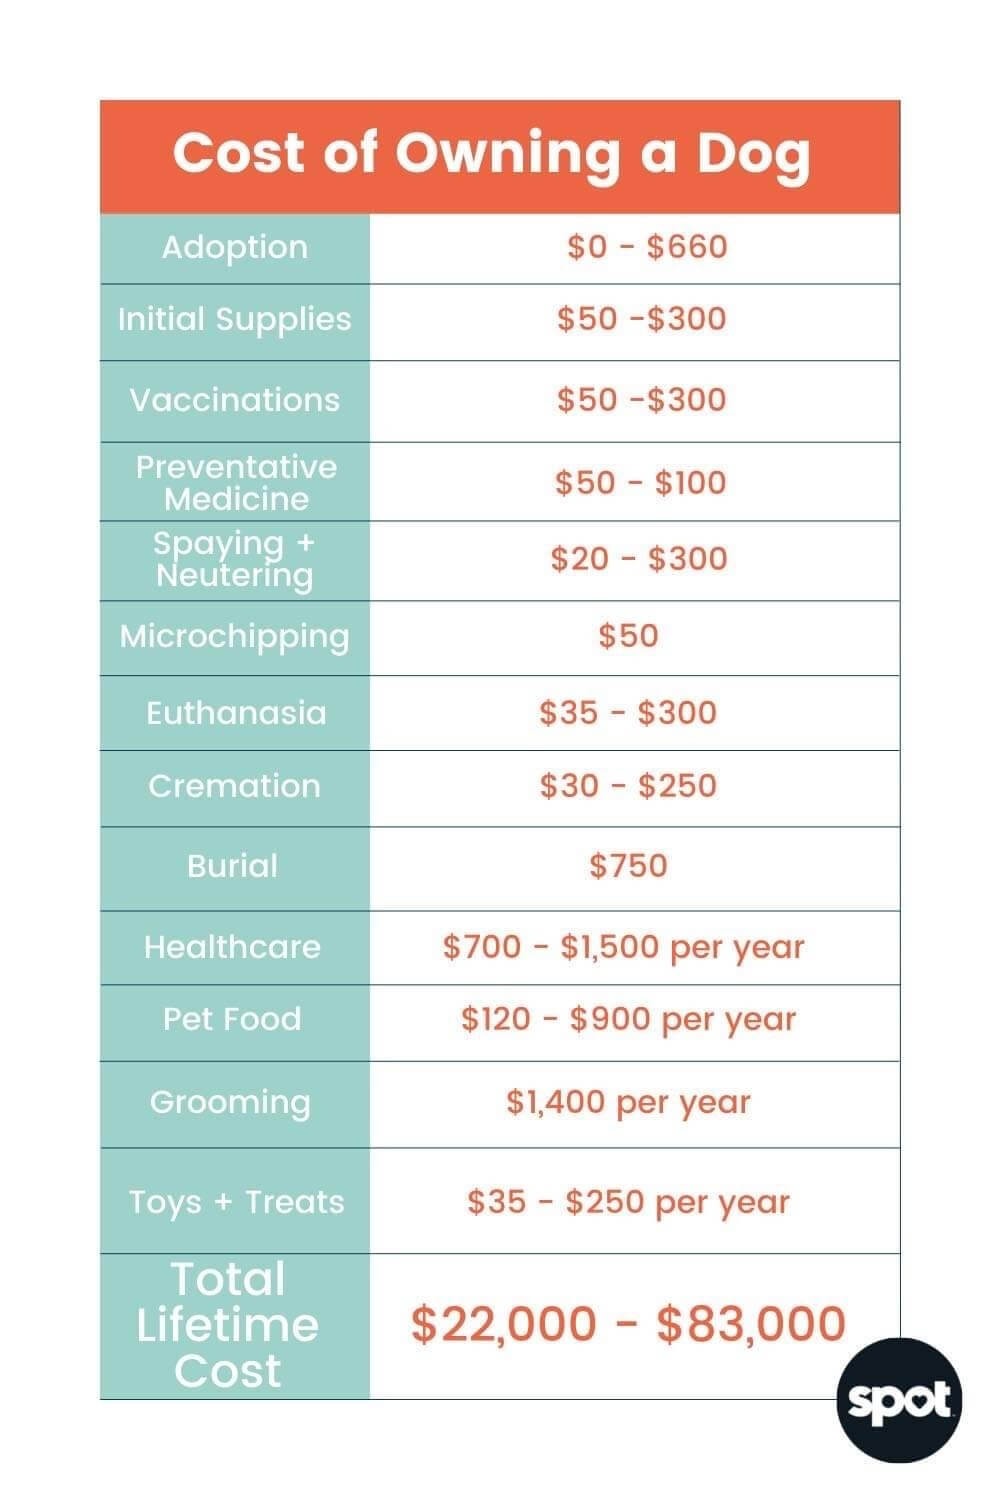 Cost of Owning a Dog: From Initial Cost to Annual Essentials